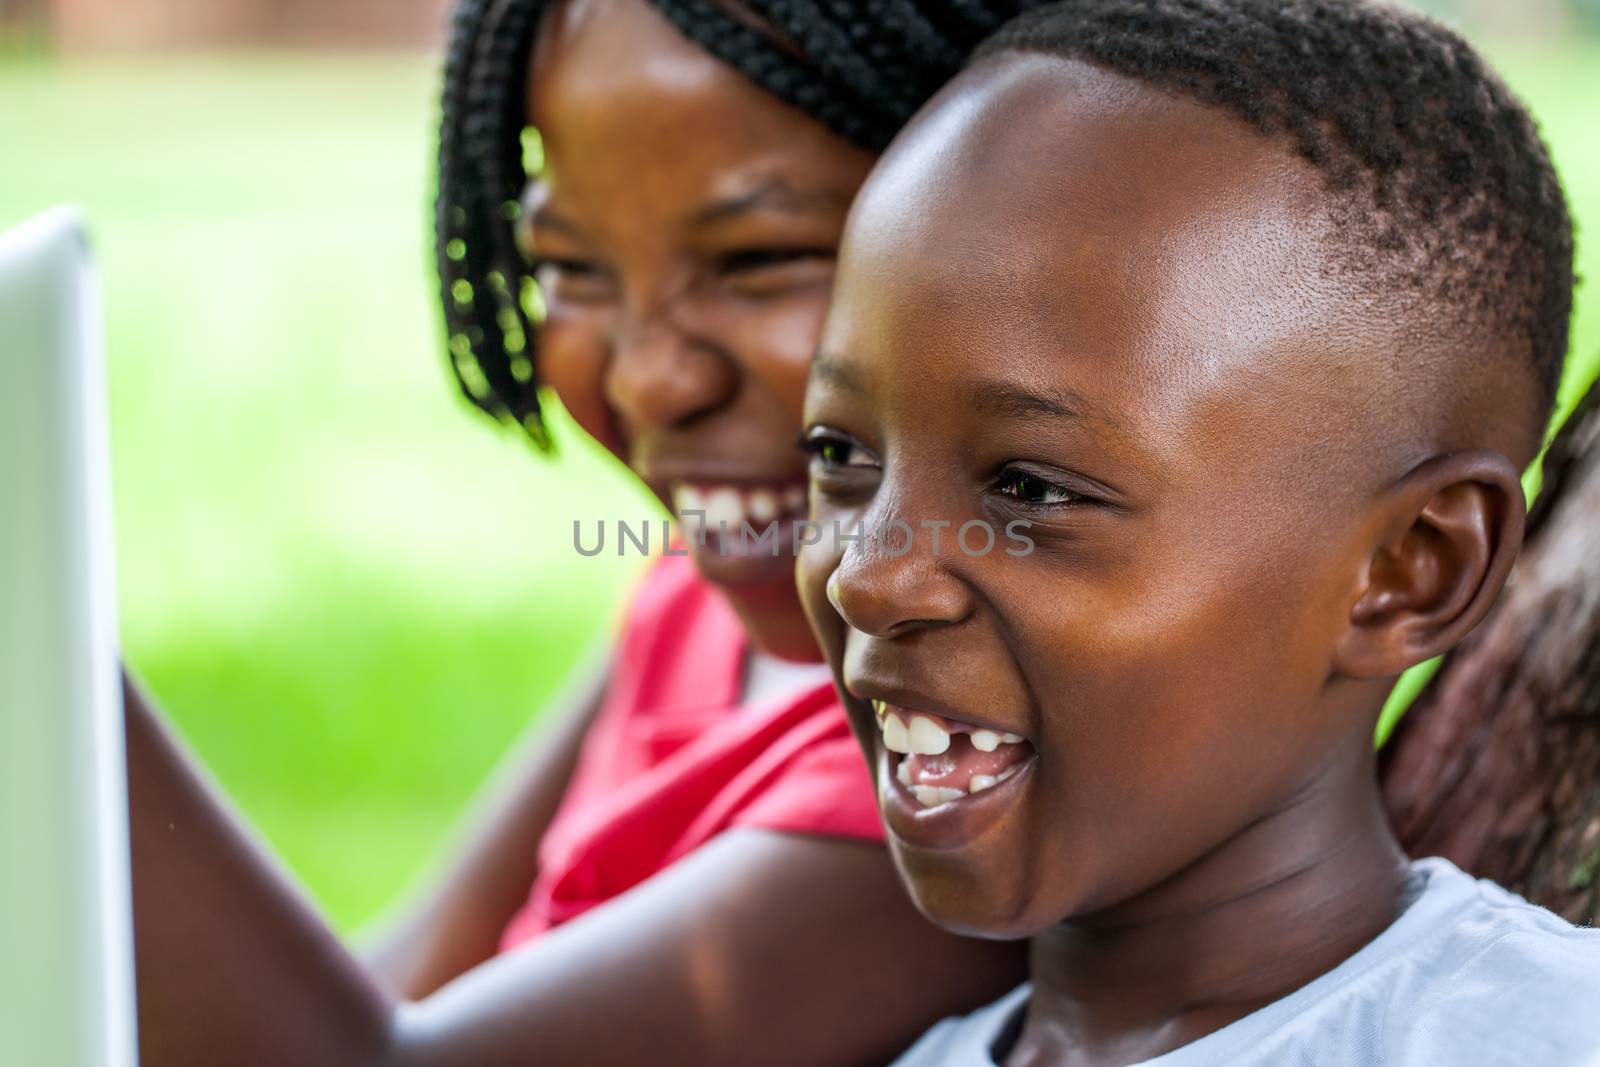 Close up face shot of African kids laughing at movie scene on digital tablet outdoors.